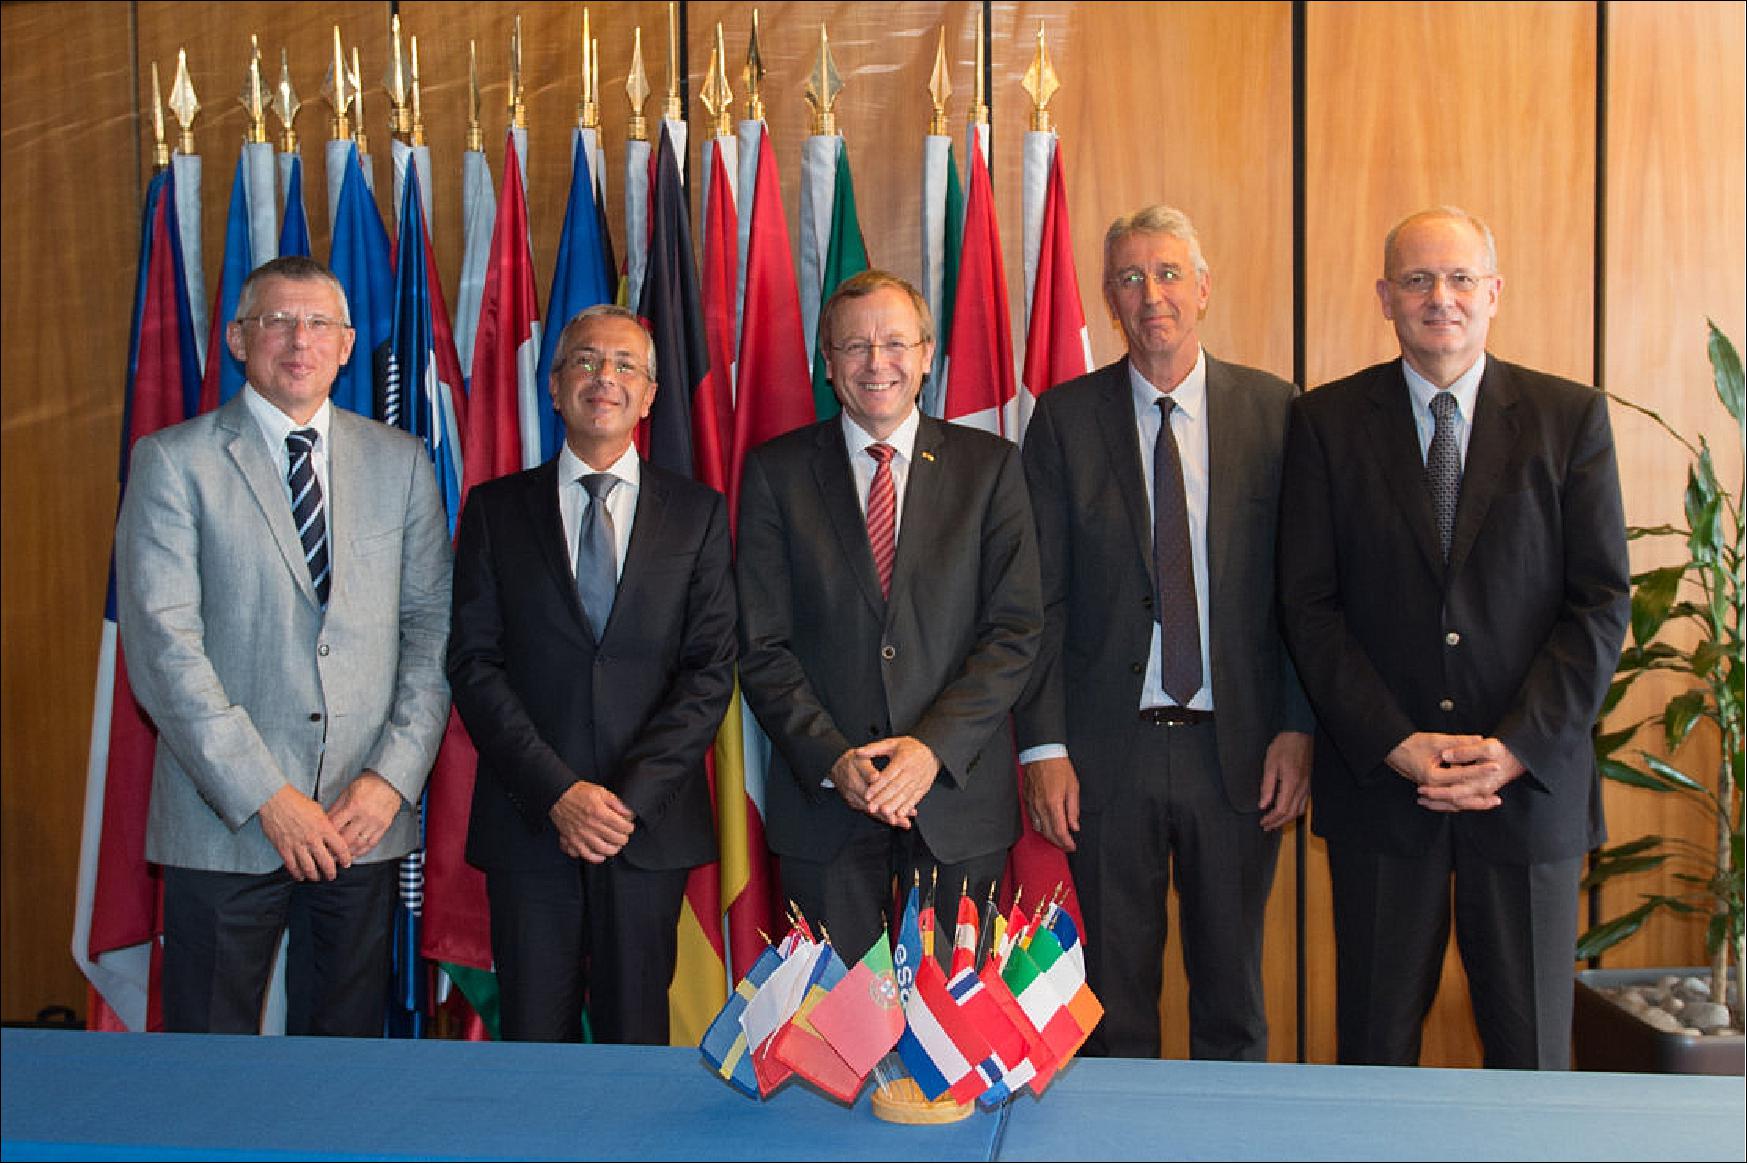 Figure 80: ESA signed contracts for the development of the Ariane 6 new‑generation launcher, its launch base and the Vega C evolution of the current ESA small launcher. From left to right: Alain Charmeau, CEO/President of ASL; Pierluigi Pirrelli, CEO of ELV; Jan Wörner, ESA Director General; Gaele Winters, ESA’s Director of Launchers; and Jean-Yves Le Gall, President of CNES (image credit: ESA, N. Imbert-Vier, 2015)